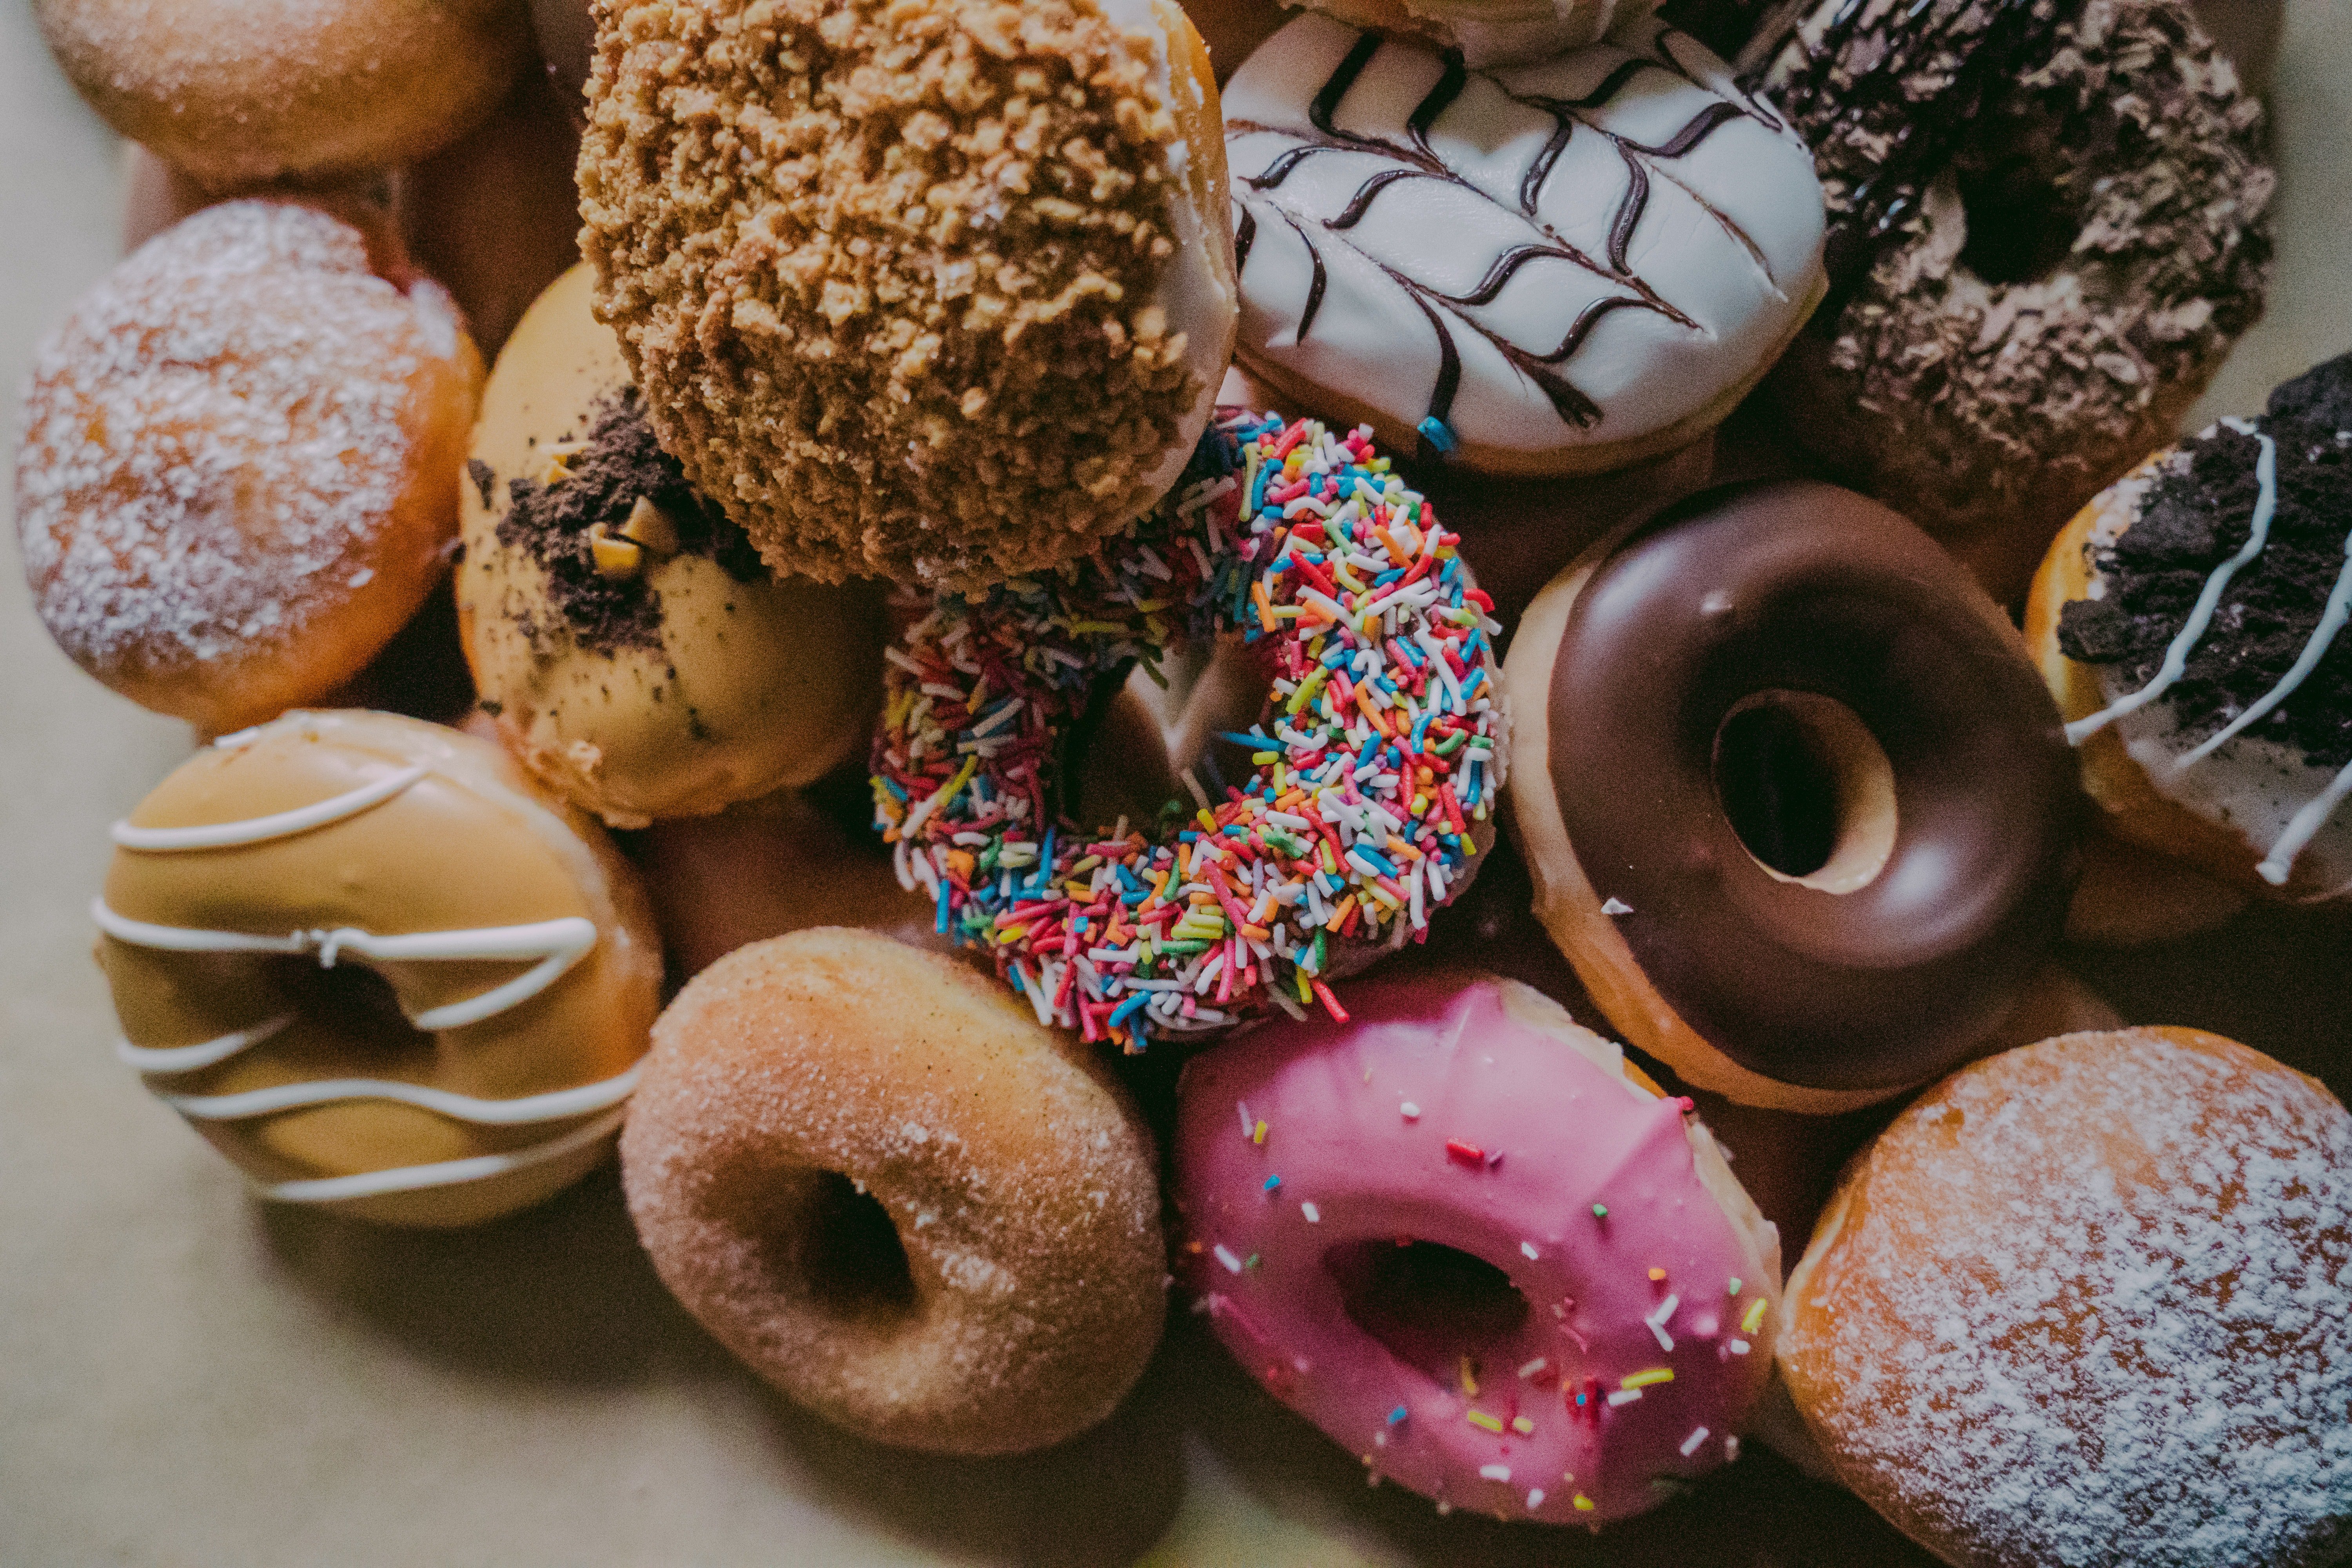 Dylan agreed to help the man in exchange for donuts. | Source: Unsplash